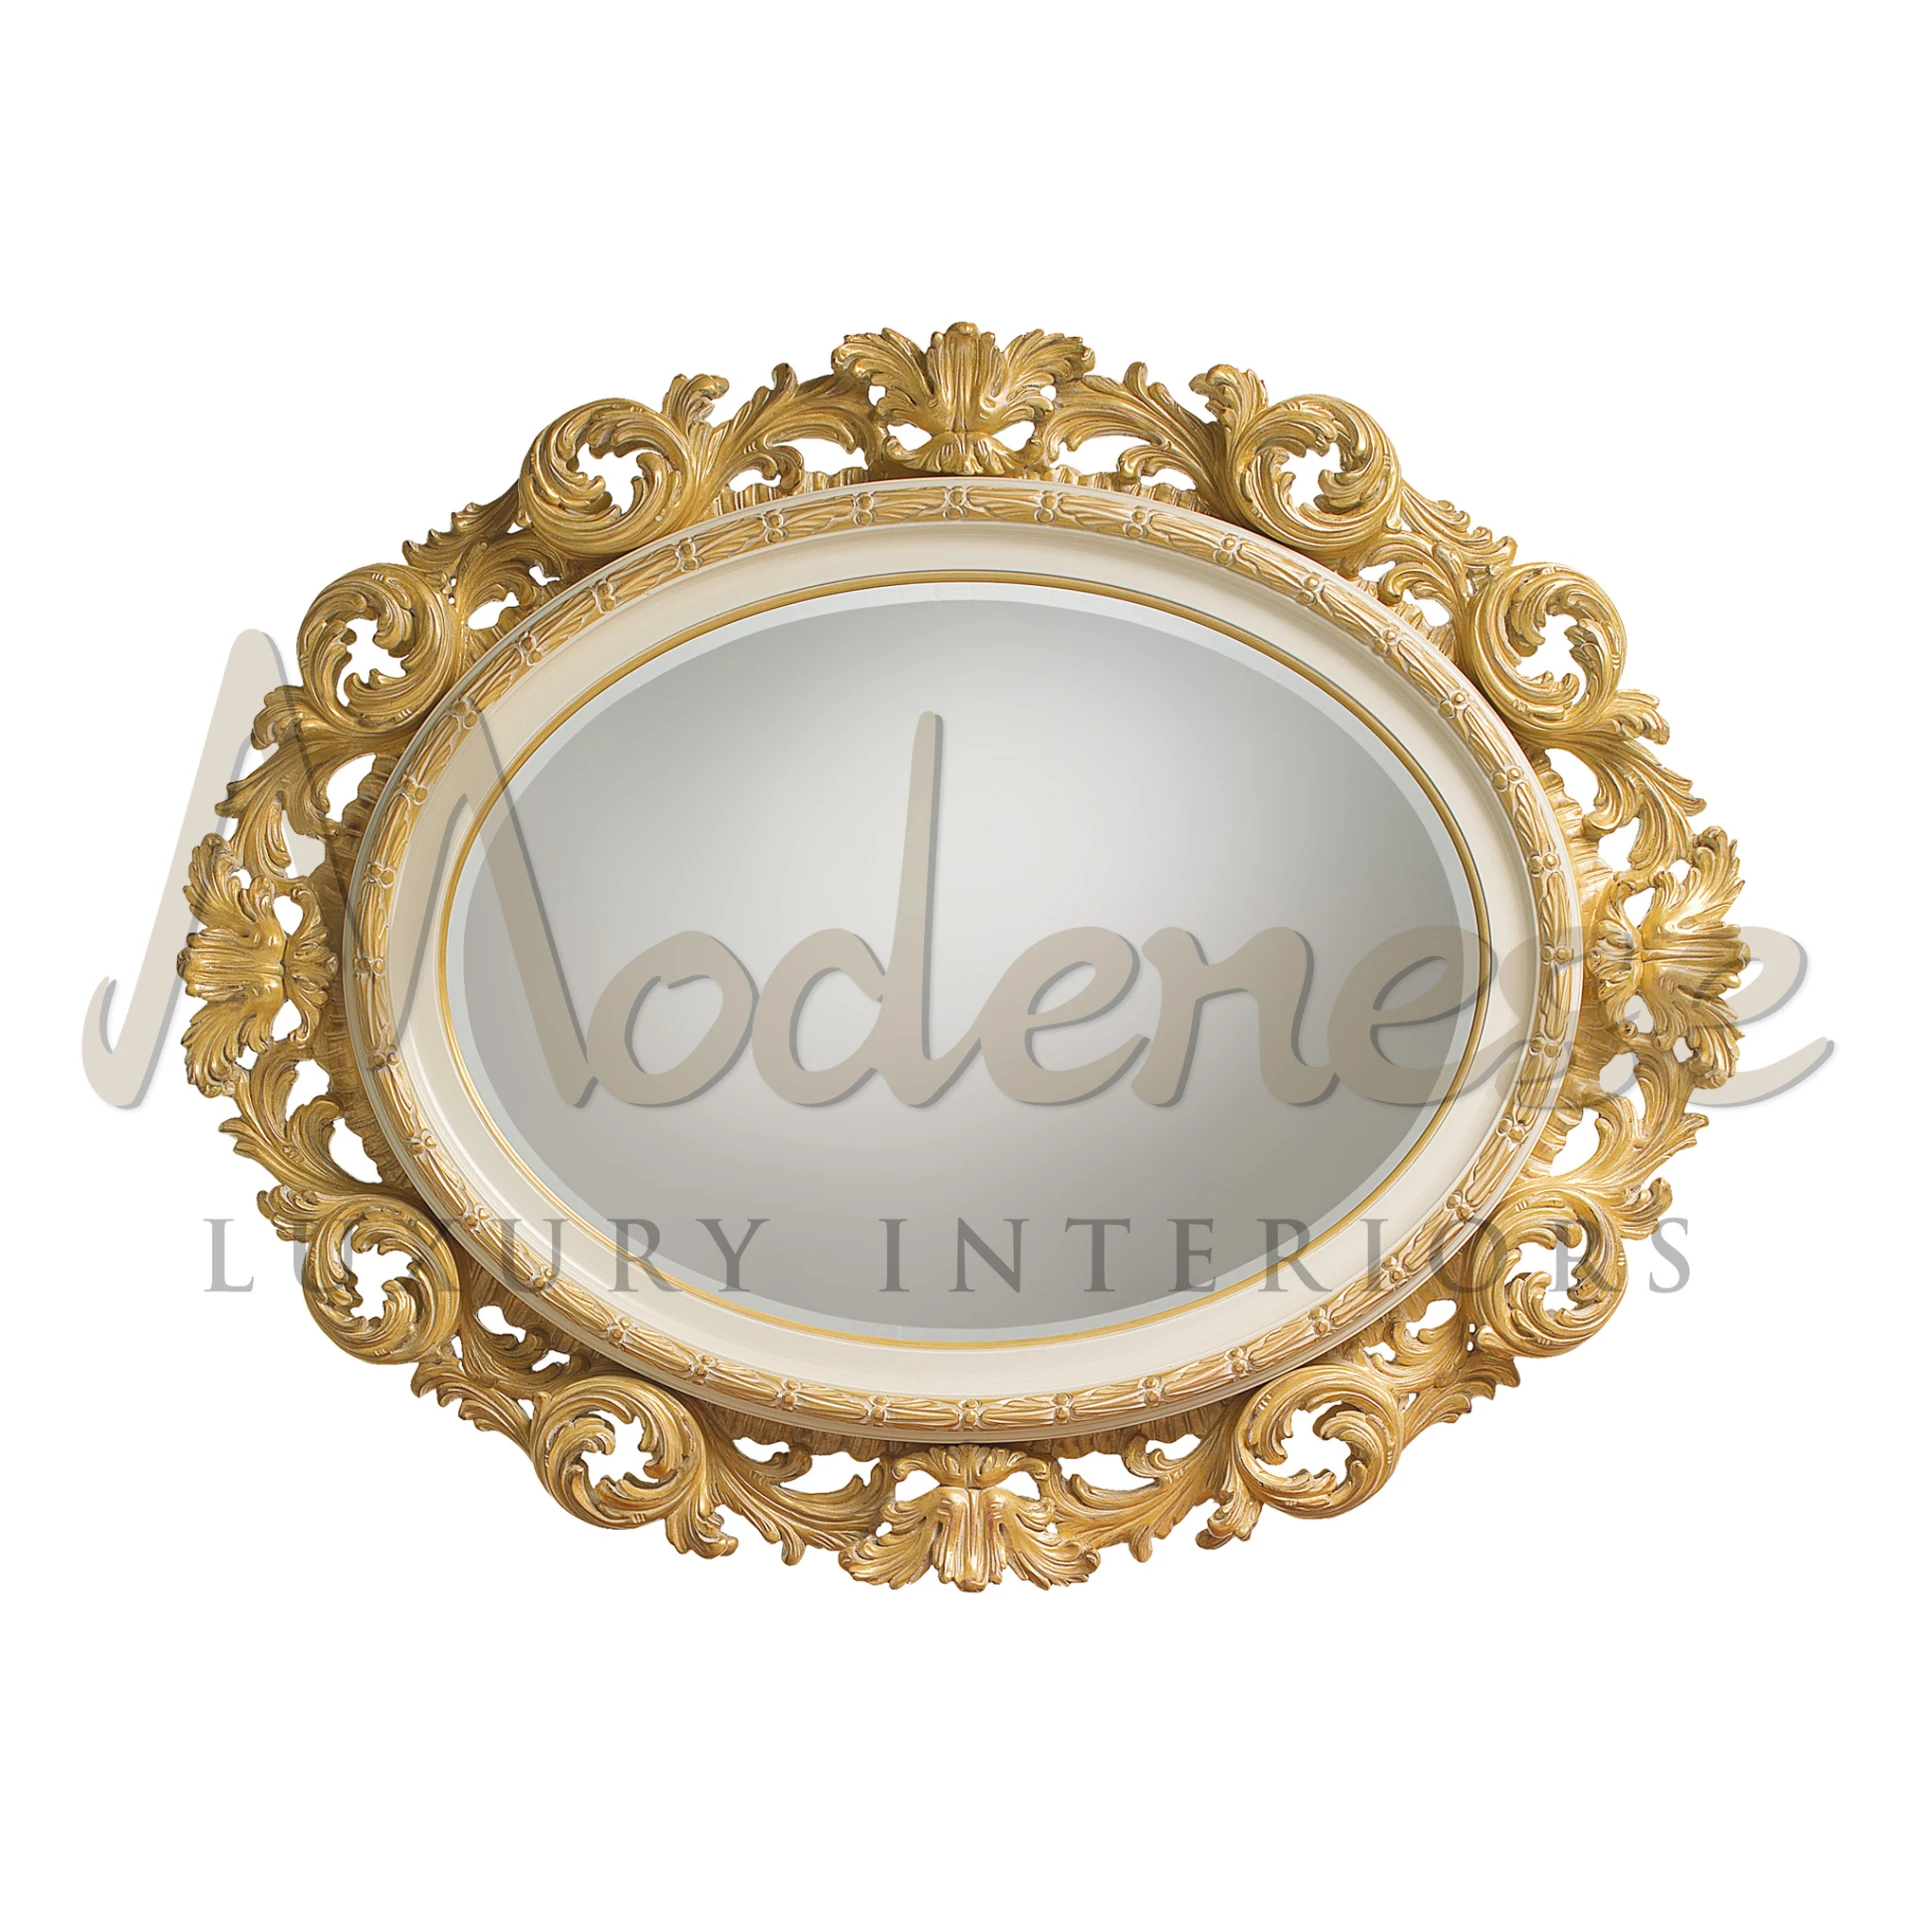 Hand Carved Classic Mirror by Modenese, a bespoke piece that brings luxury and Italian craftsmanship to your interior design.